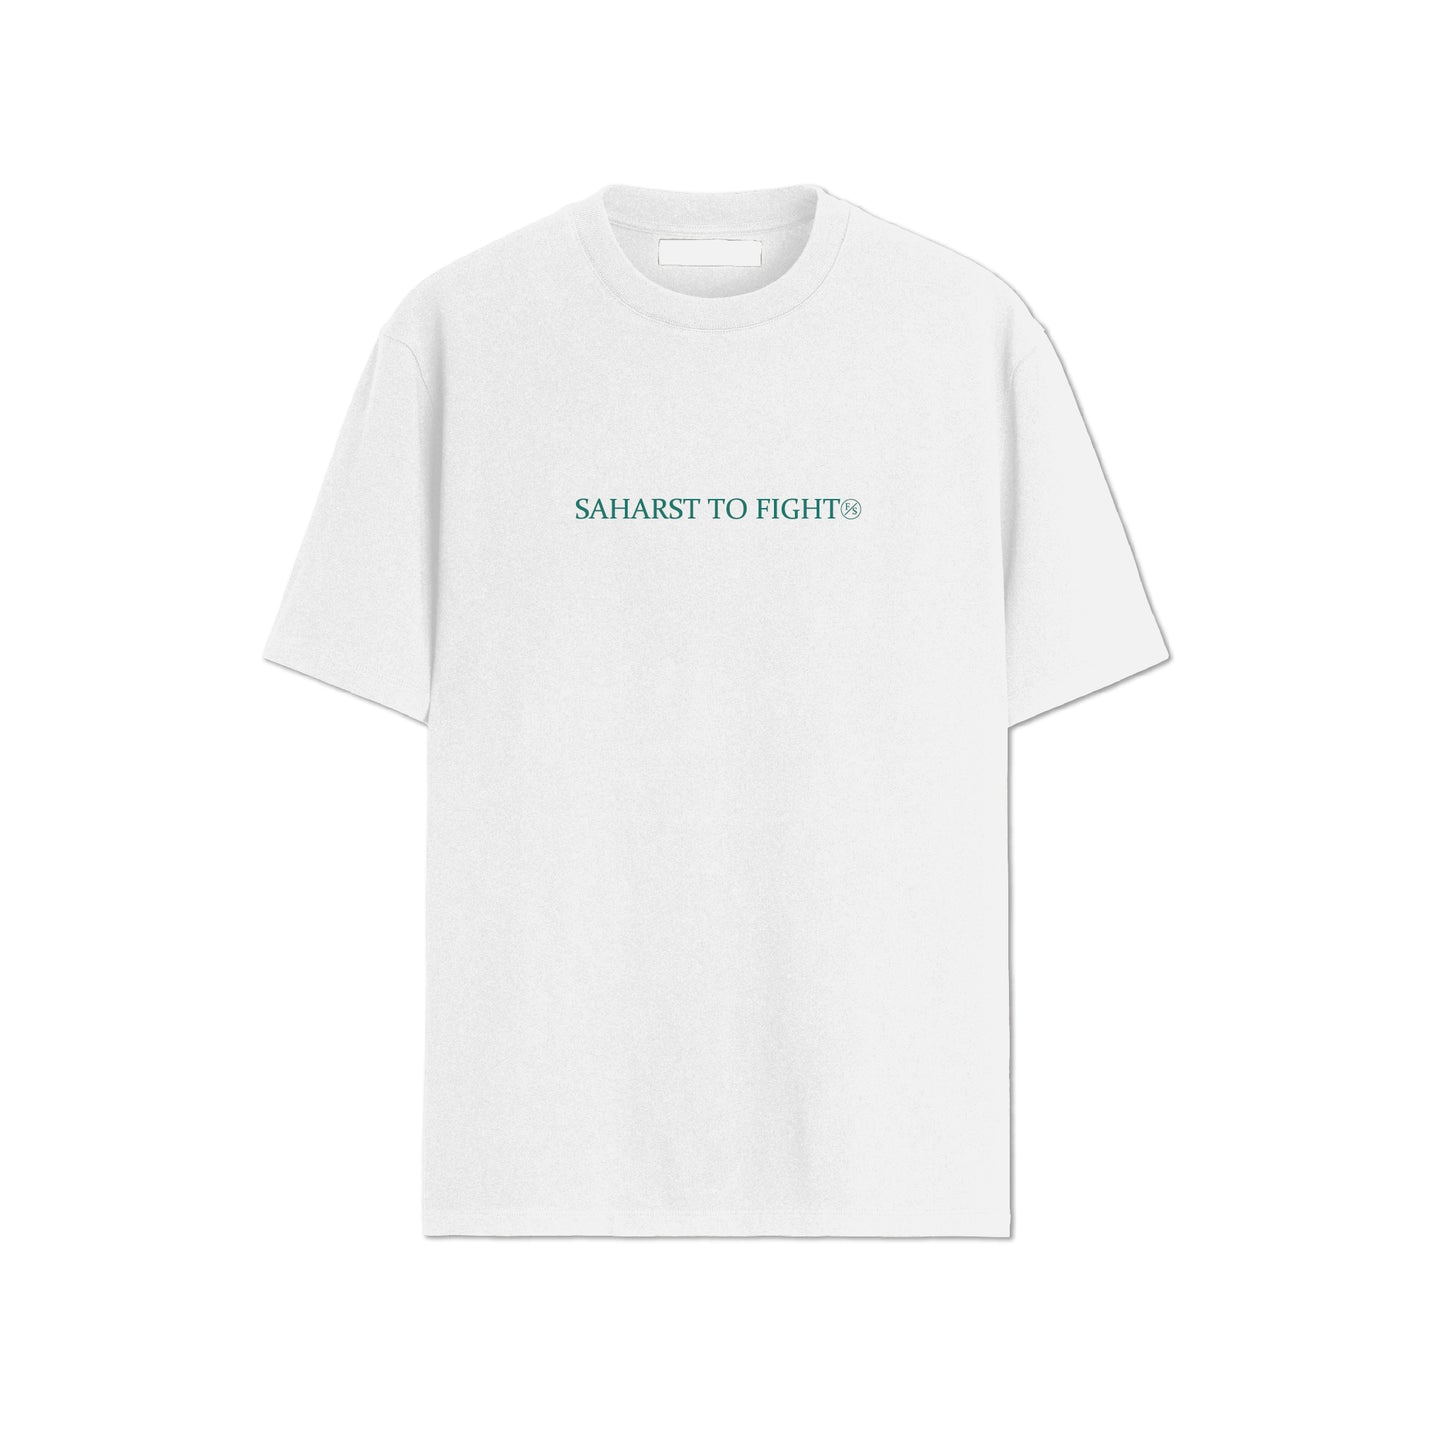 SAHAA×FIRST TO FIGHT W NAME T-shirts "MHINDT"